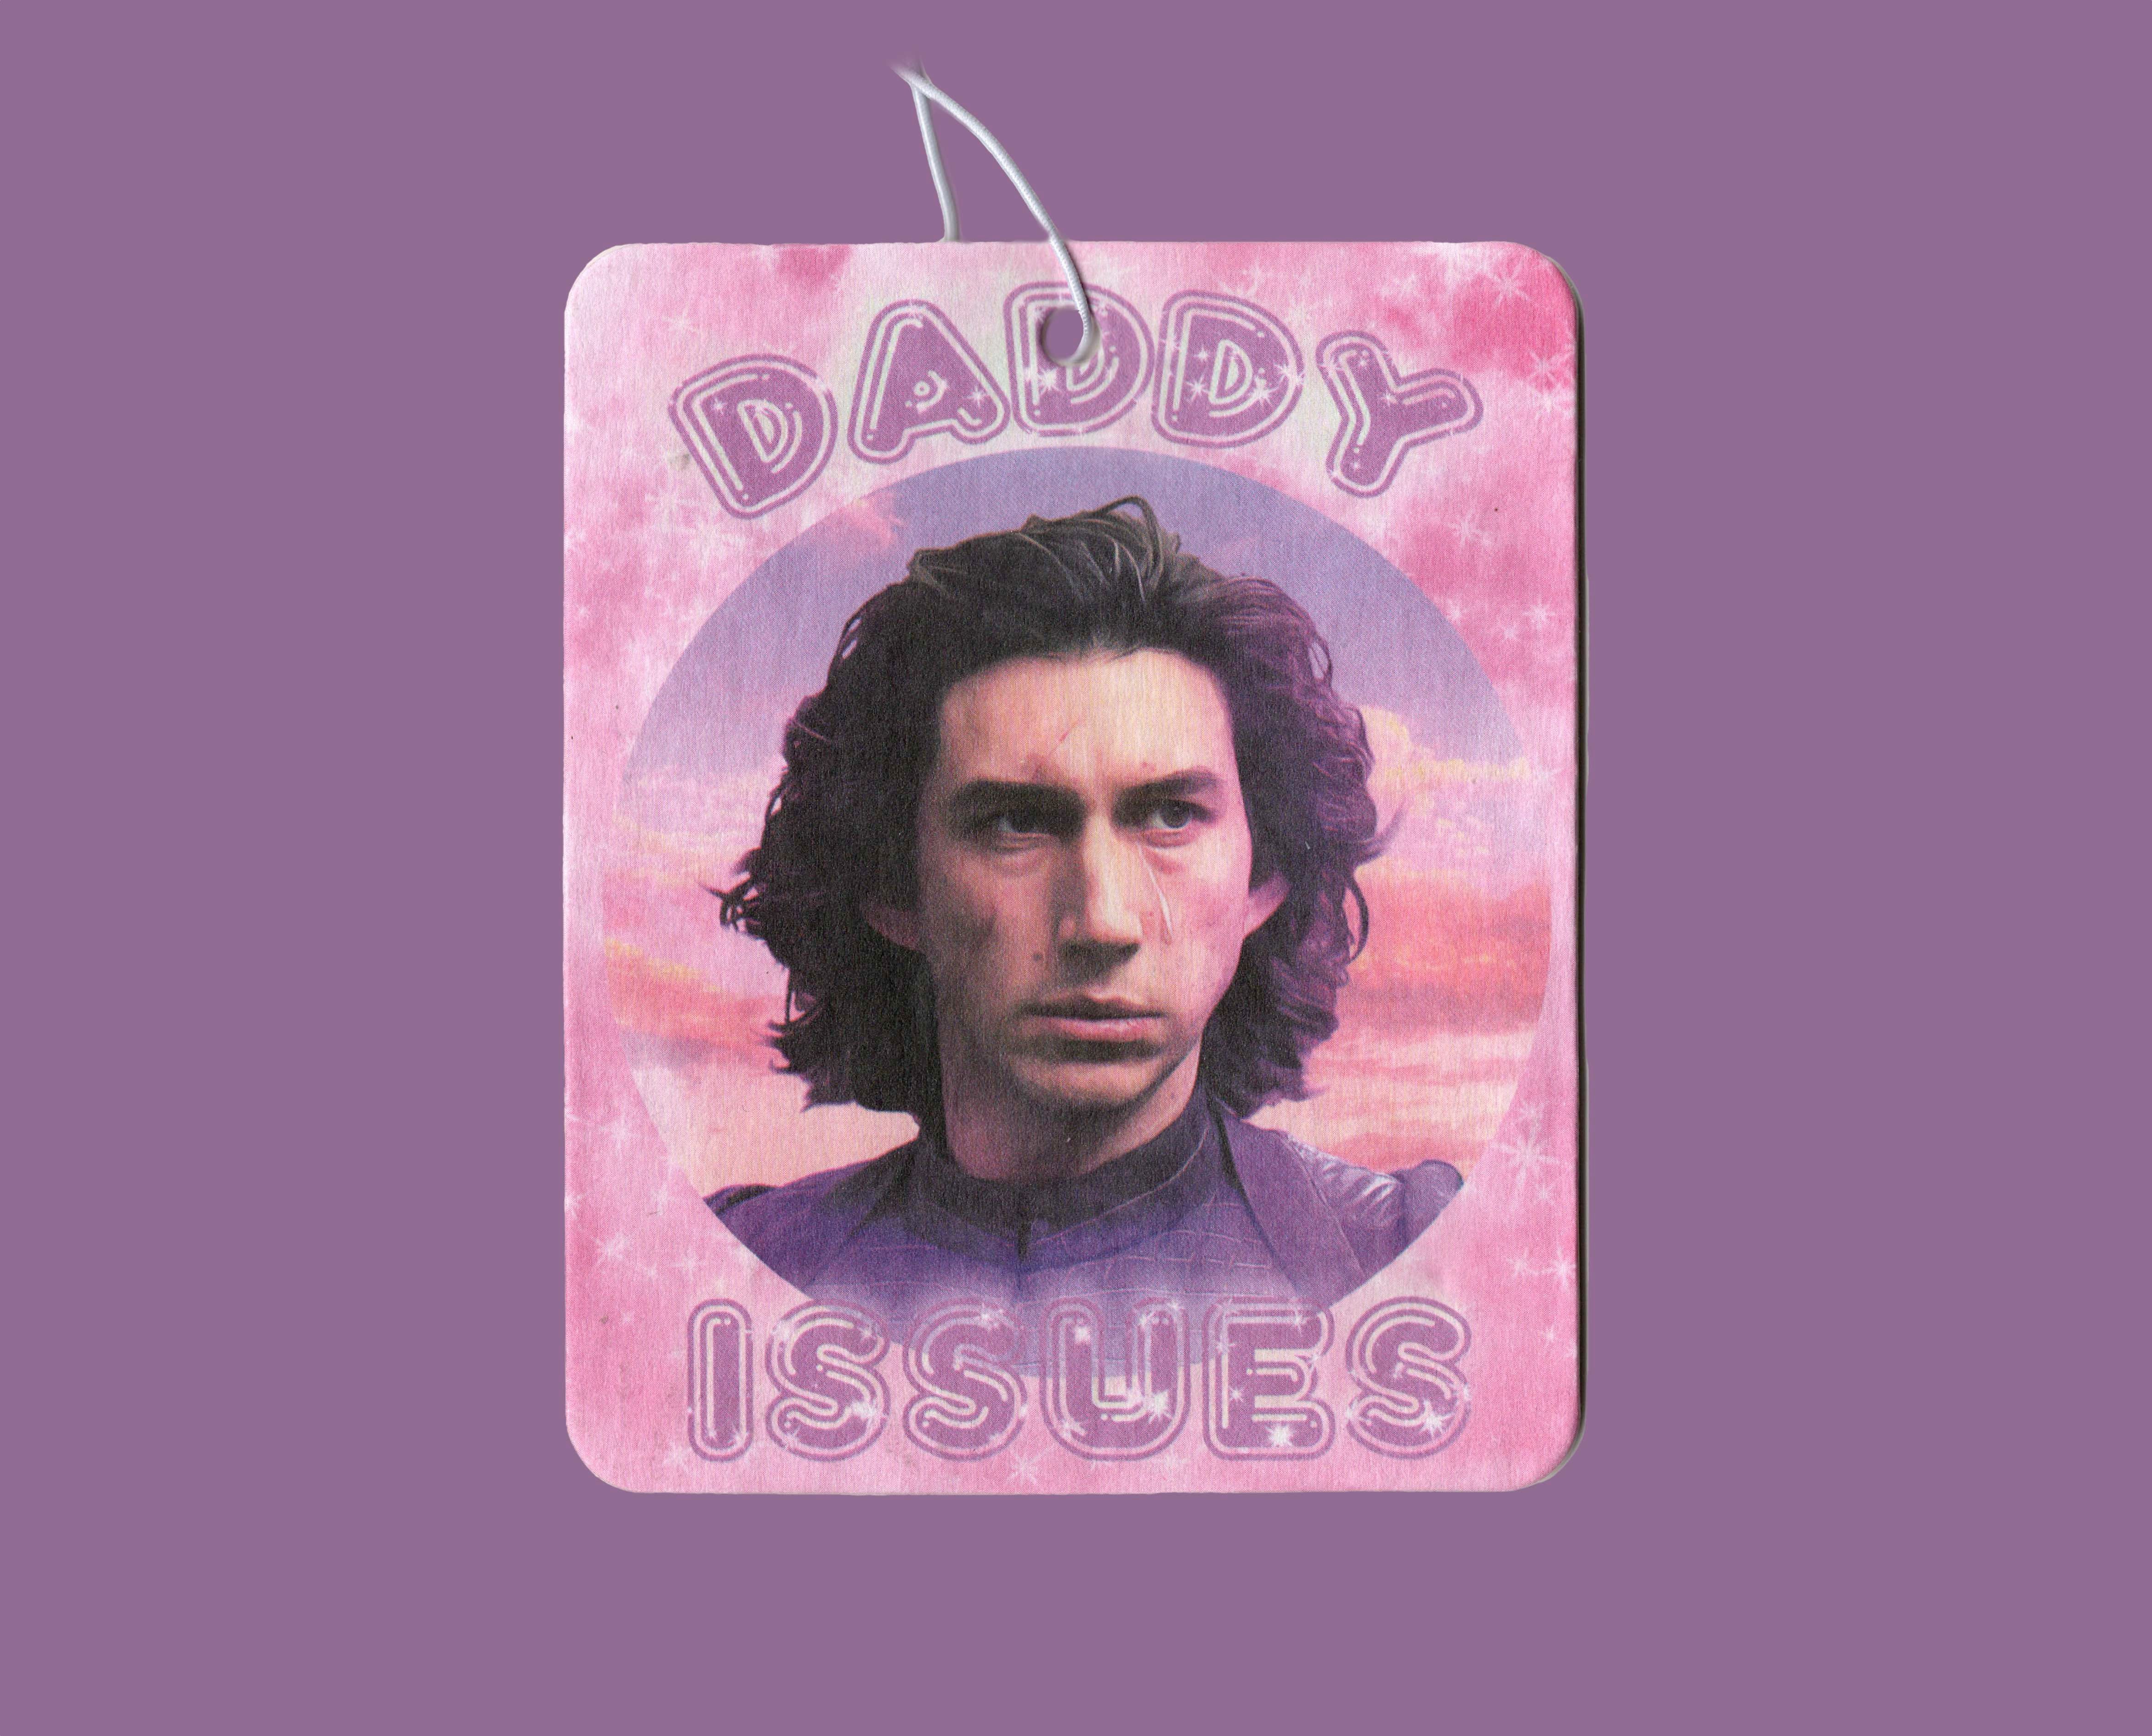 Daddy Issues 